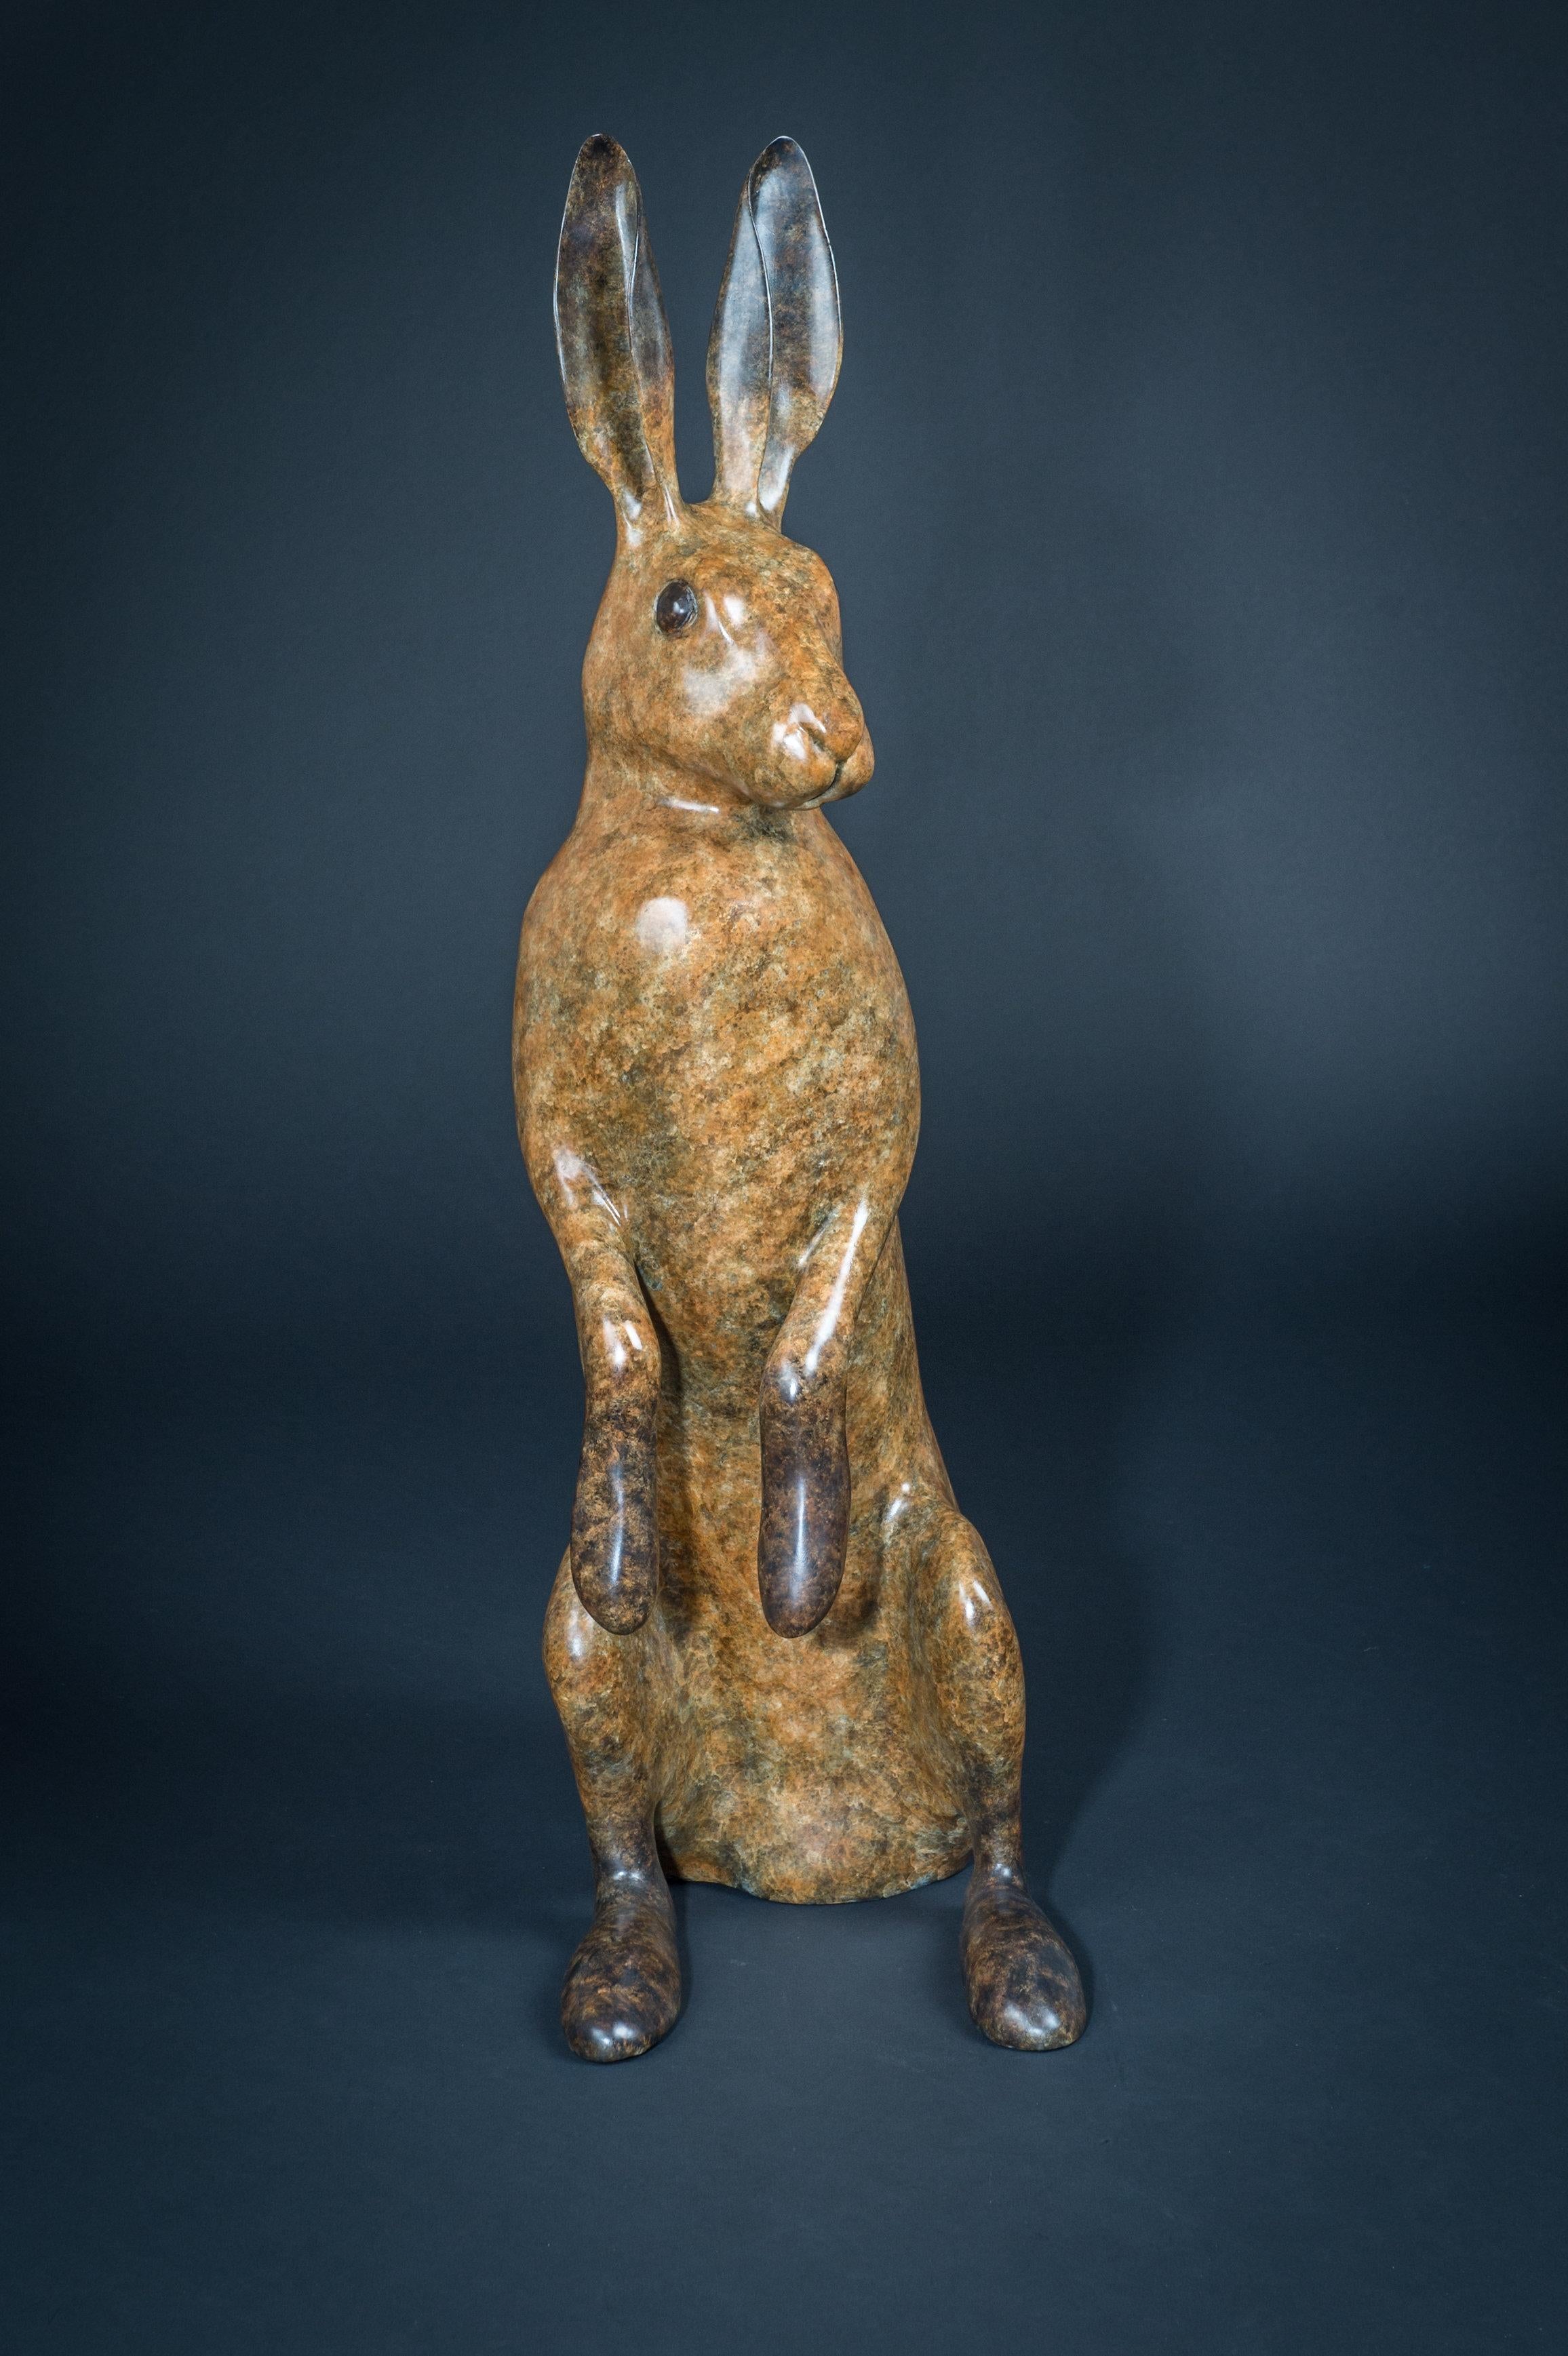 Richard Smith b.1955 Figurative Sculpture - Contemporary Bronze Large Sculpture 'Majestic Hare' by Richard Smith 